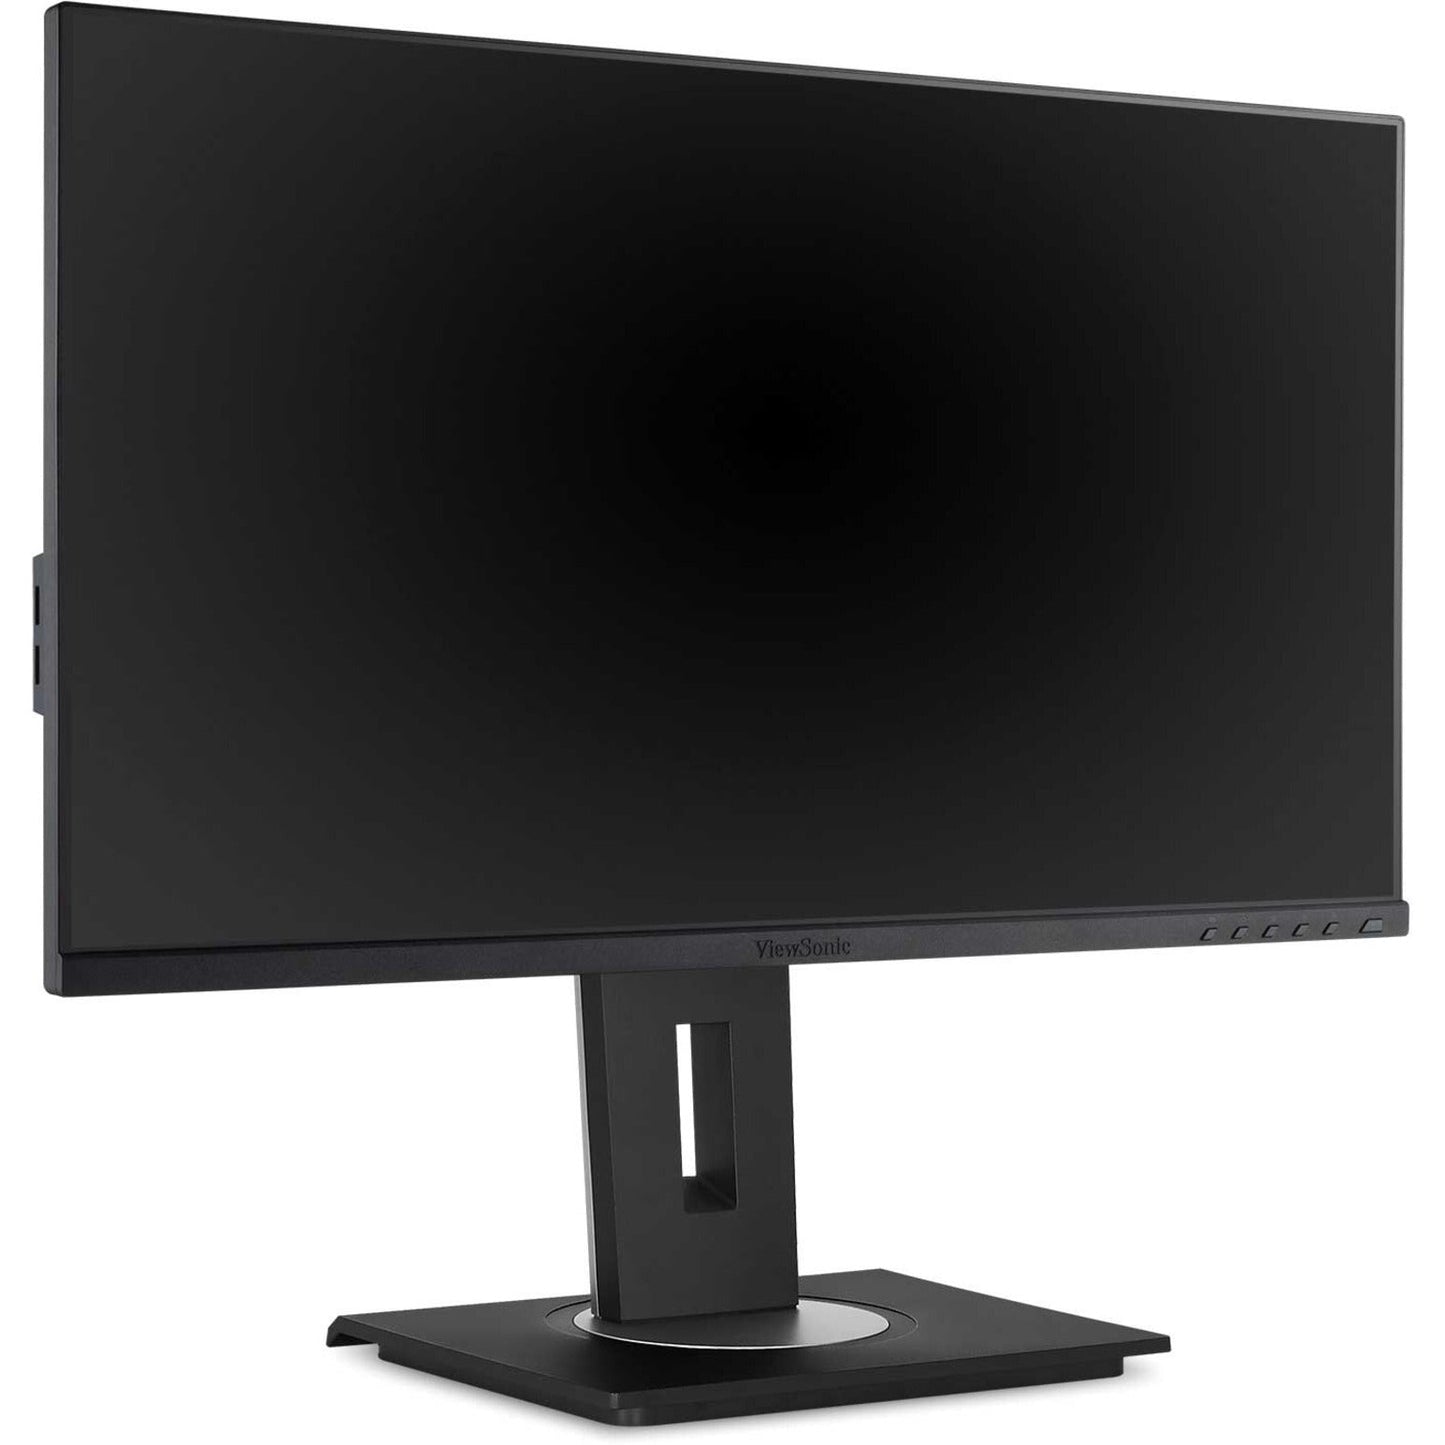 ViewSonic VG2455-2K 24 Inch IPS 1440p Monitor with USB C 3.1 HDMI DisplayPort and 40 Degree Tilt Ergonomics for Home and Office